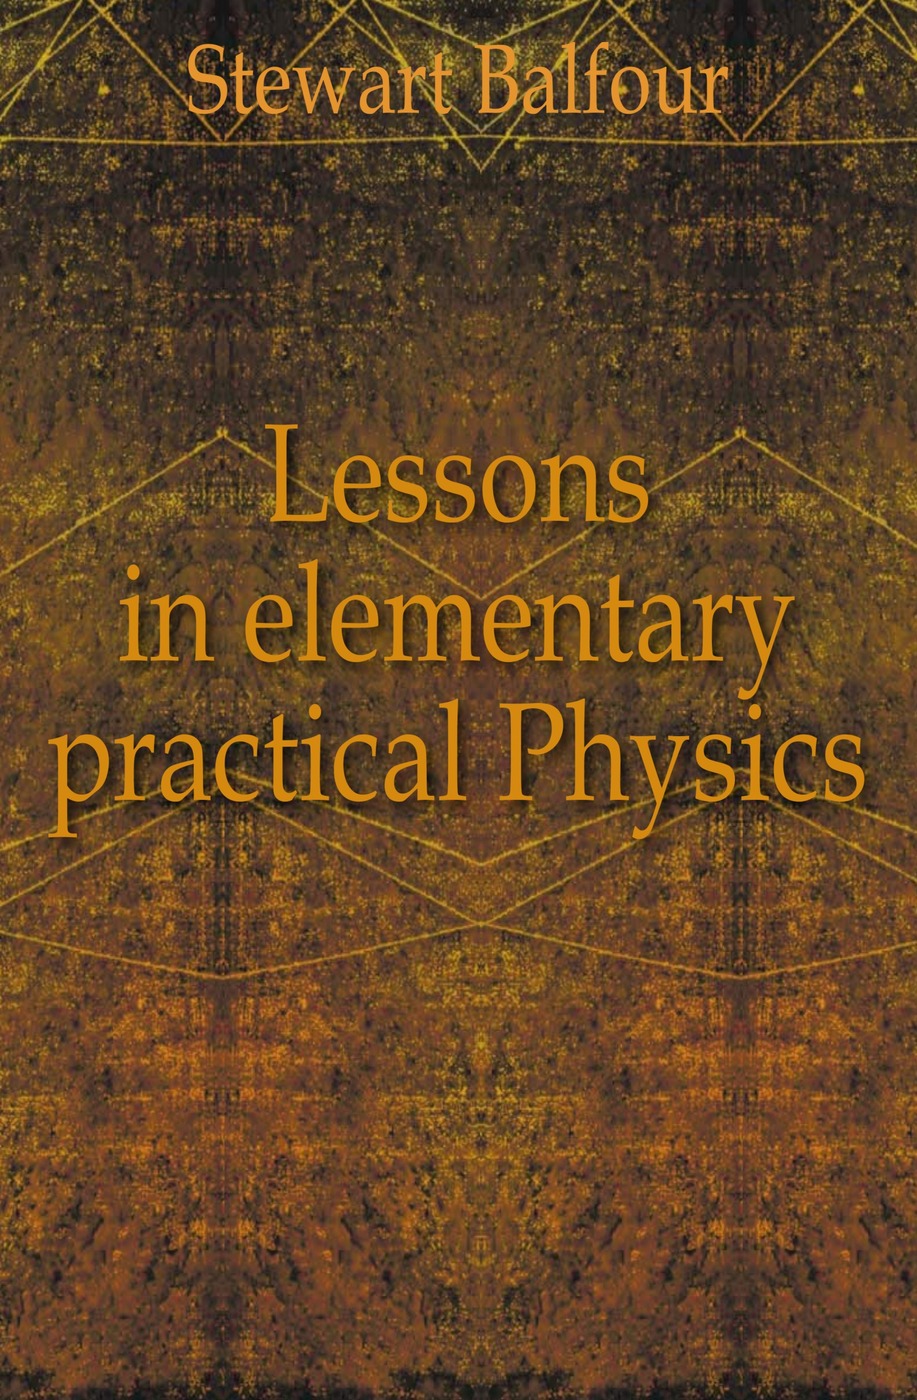 Lessons in elementary practical Physics